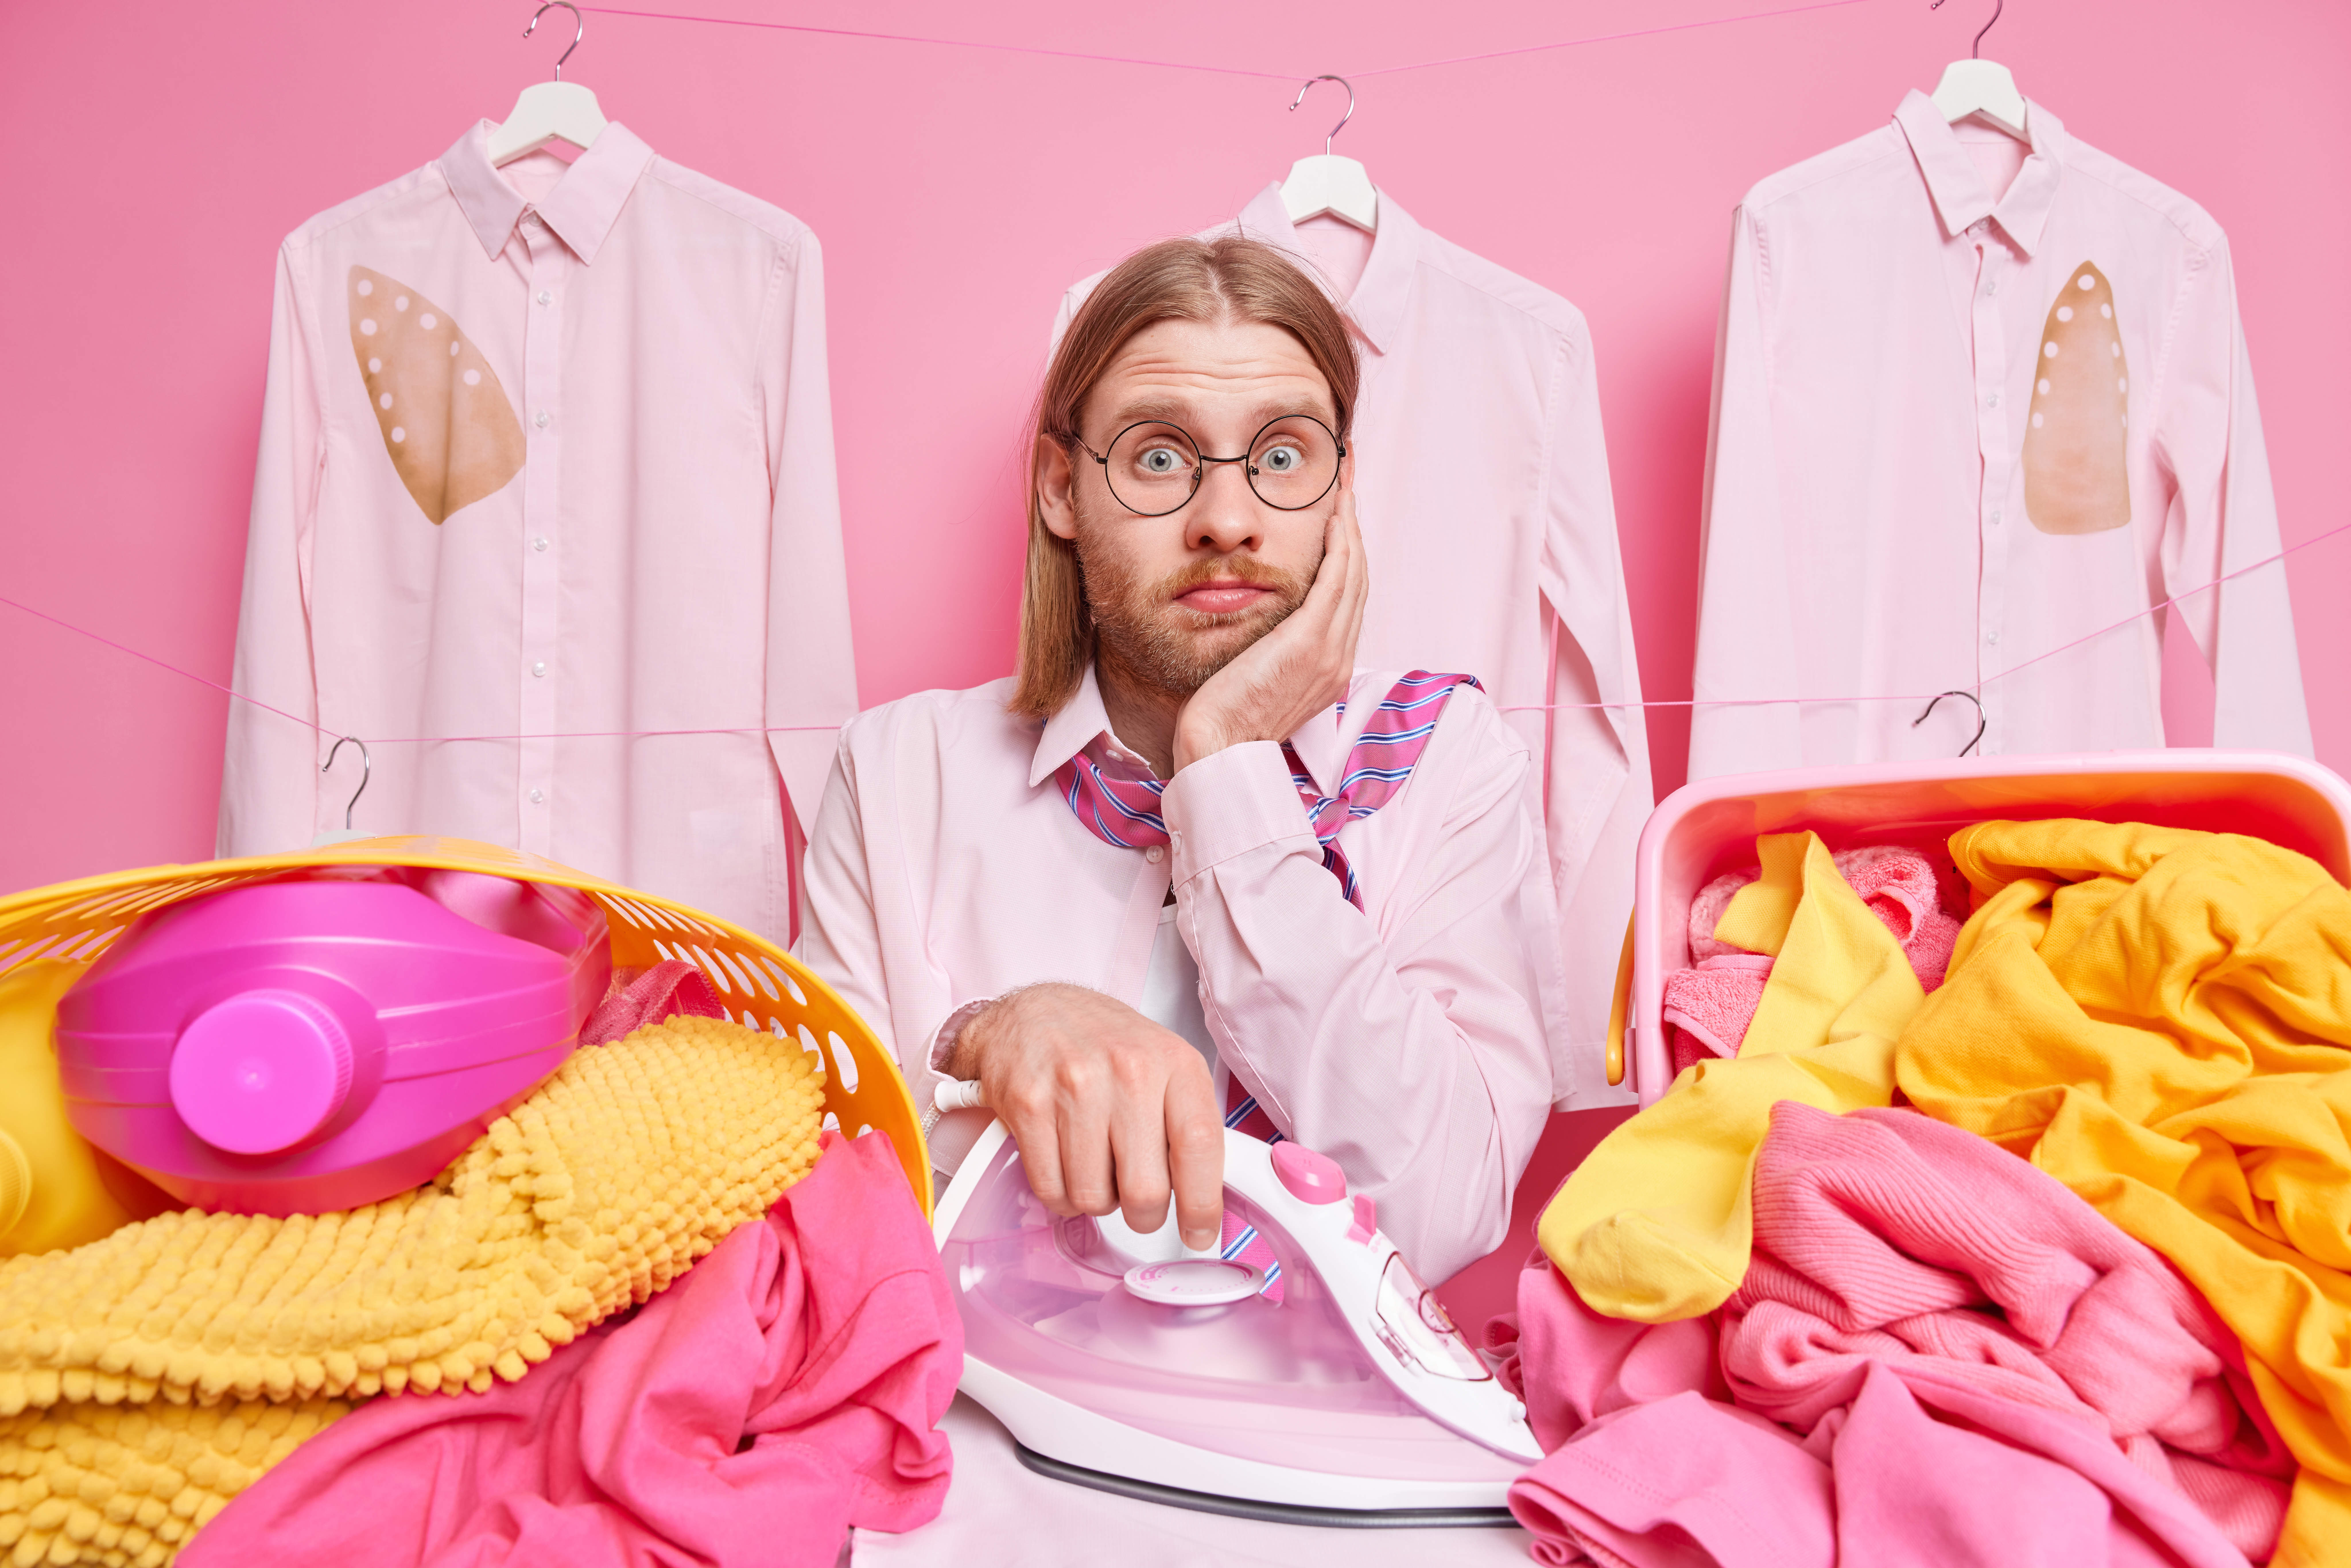 Man holding an iron in the midst of pink and yellow laundry | Source: wayhomestudio on Freepik